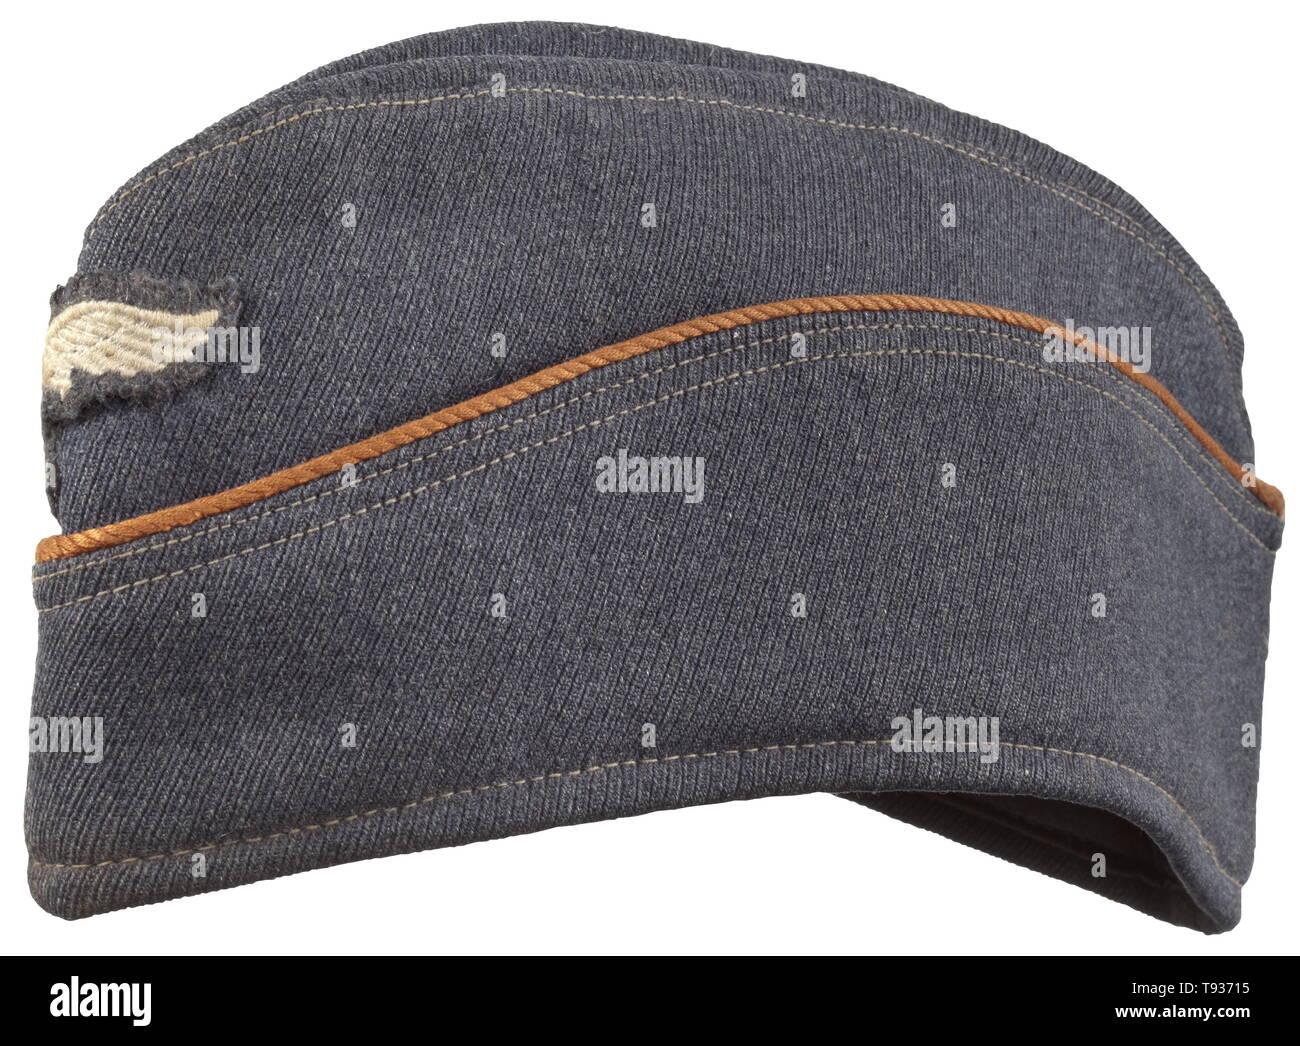 A garrison cap for Luftwaffe female auxiliaries depot piece from the year 1942 Luftwaffe-grey gabardine, continuous copper-brown cord, machine embroidered Luftwaffe eagle, grey-blue silk liner with faded depot-, size and maker stampings. historic, historical, Air Force, branch of service, branches of service, armed service, armed services, military, militaria, air forces, object, objects, stills, clipping, clippings, cut out, cut-out, cut-outs, 20th century, Editorial-Use-Only Stock Photo